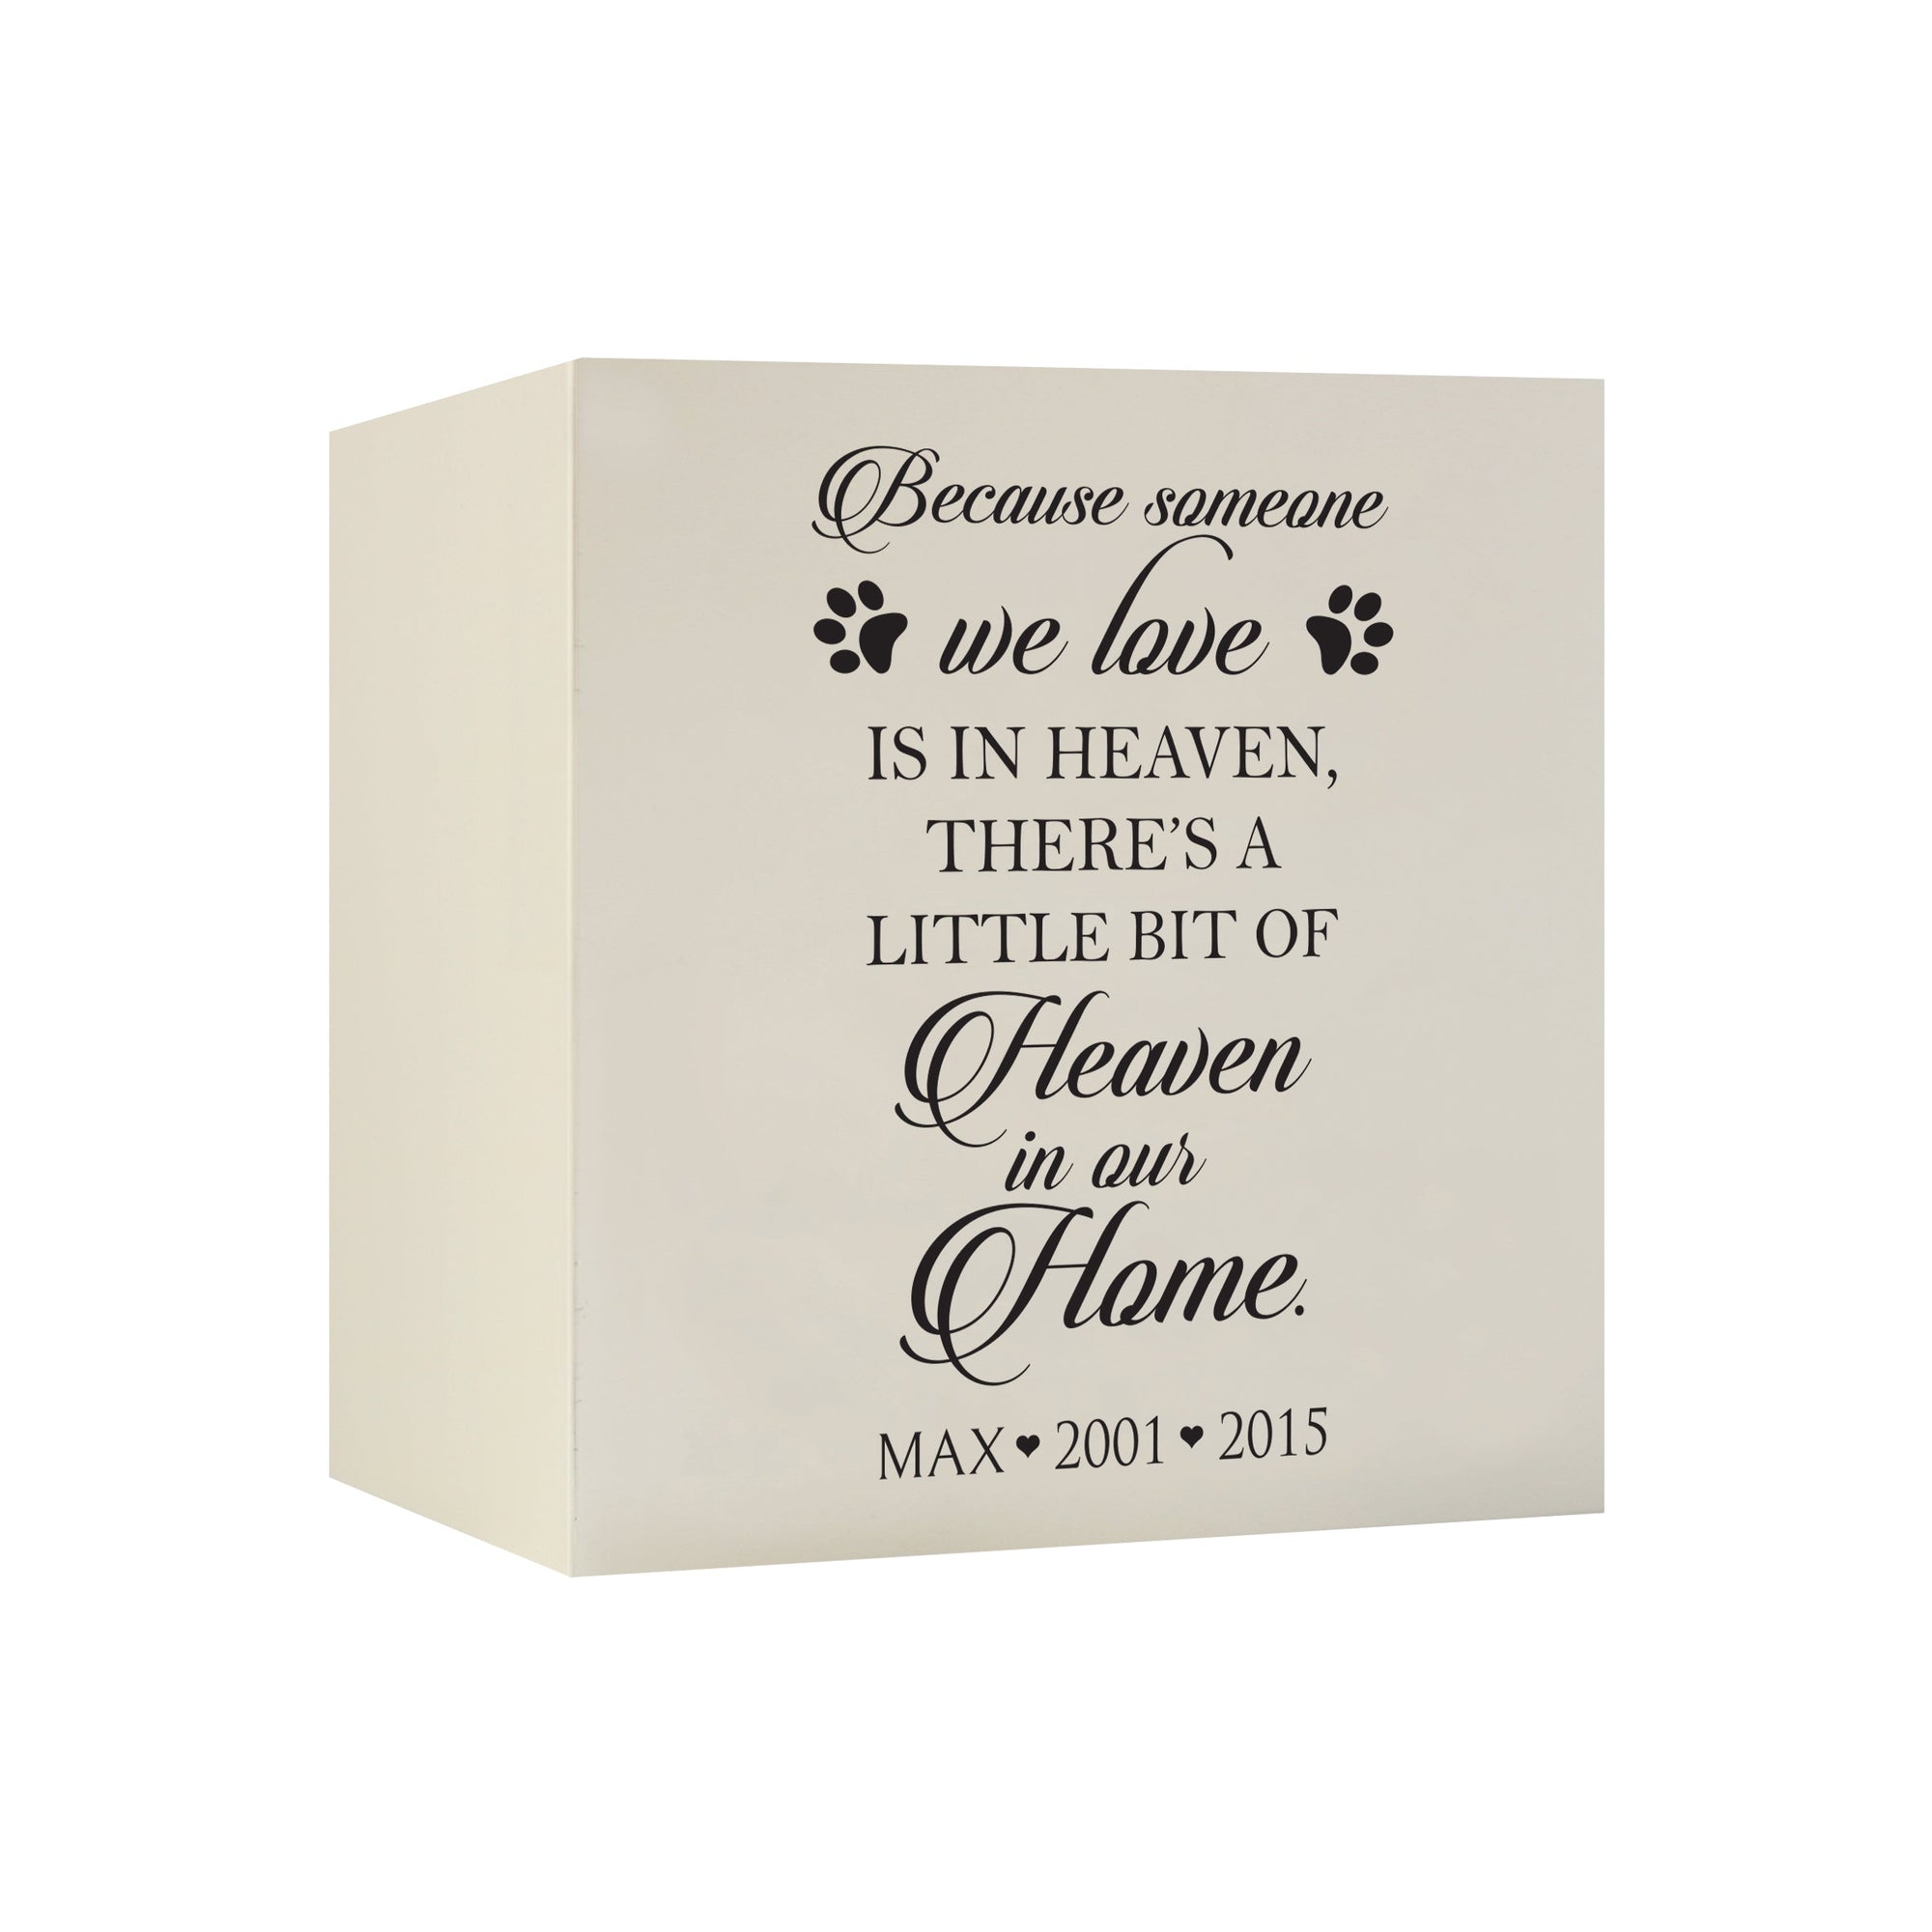 Pet Memorial Shadow Box Cremation Urn for Dog or Cat - Because Someone We Love Is In Heaven